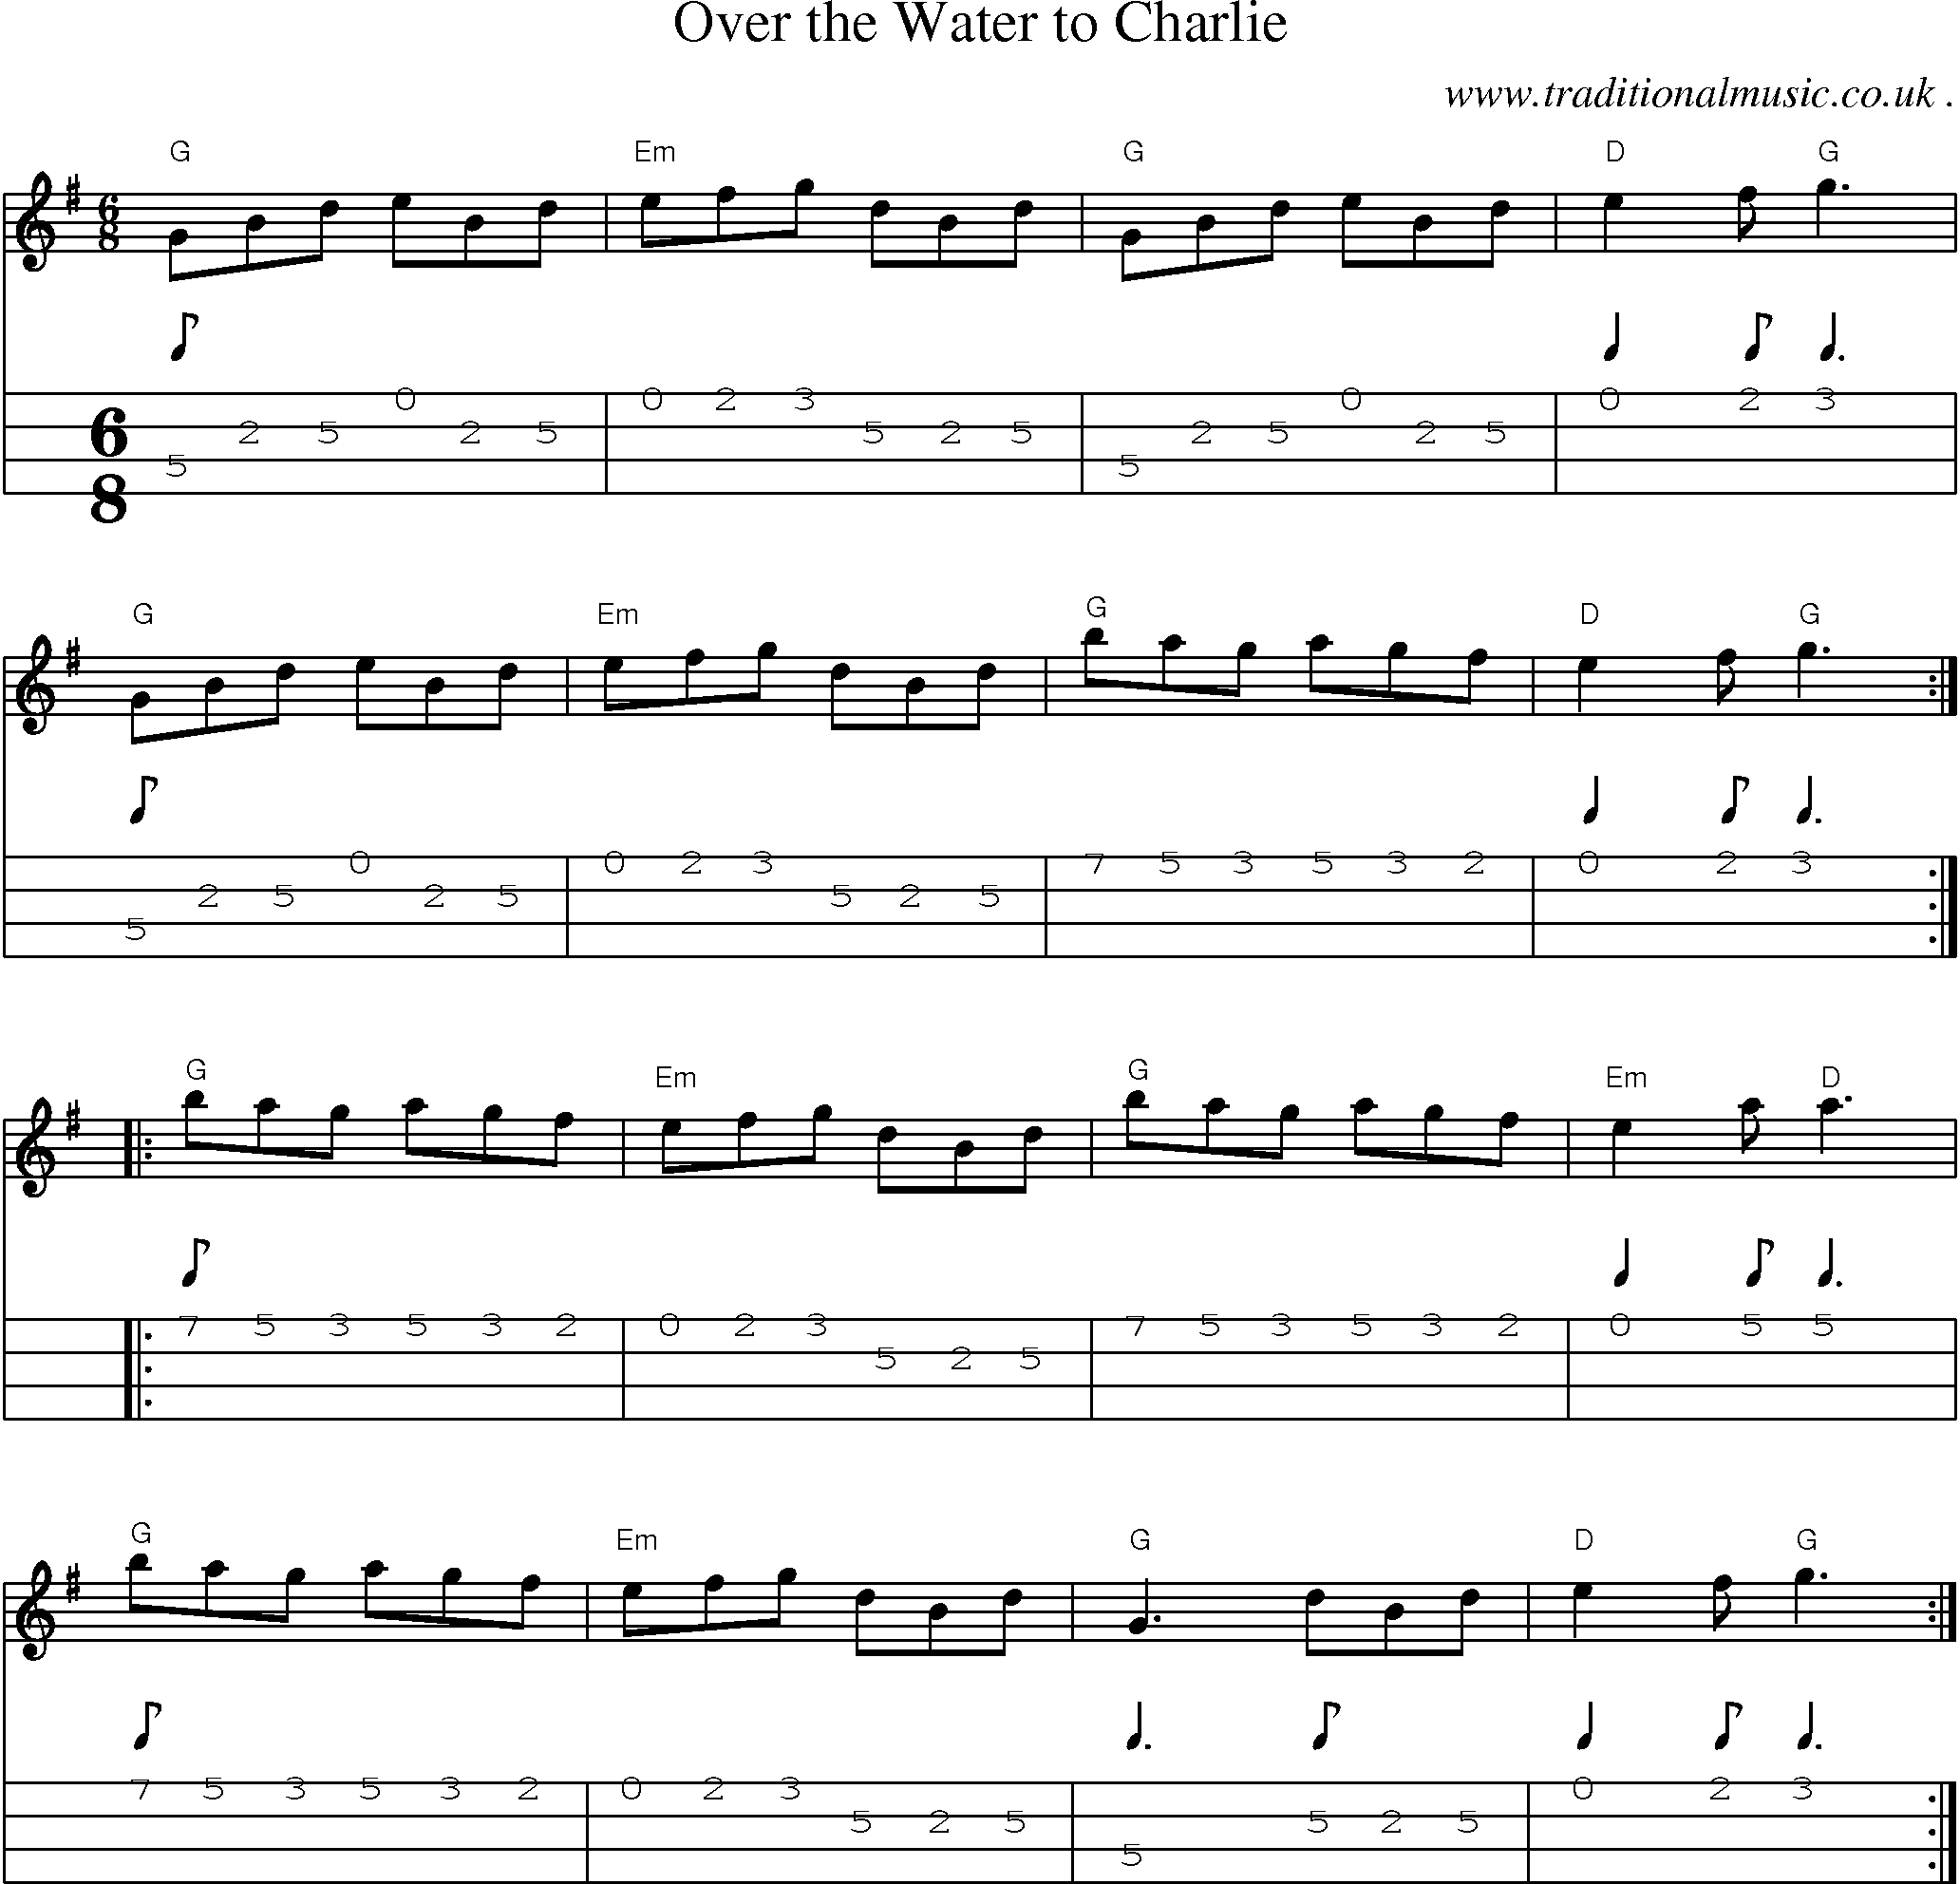 Music Score and Guitar Tabs for Over the Water to Charlie